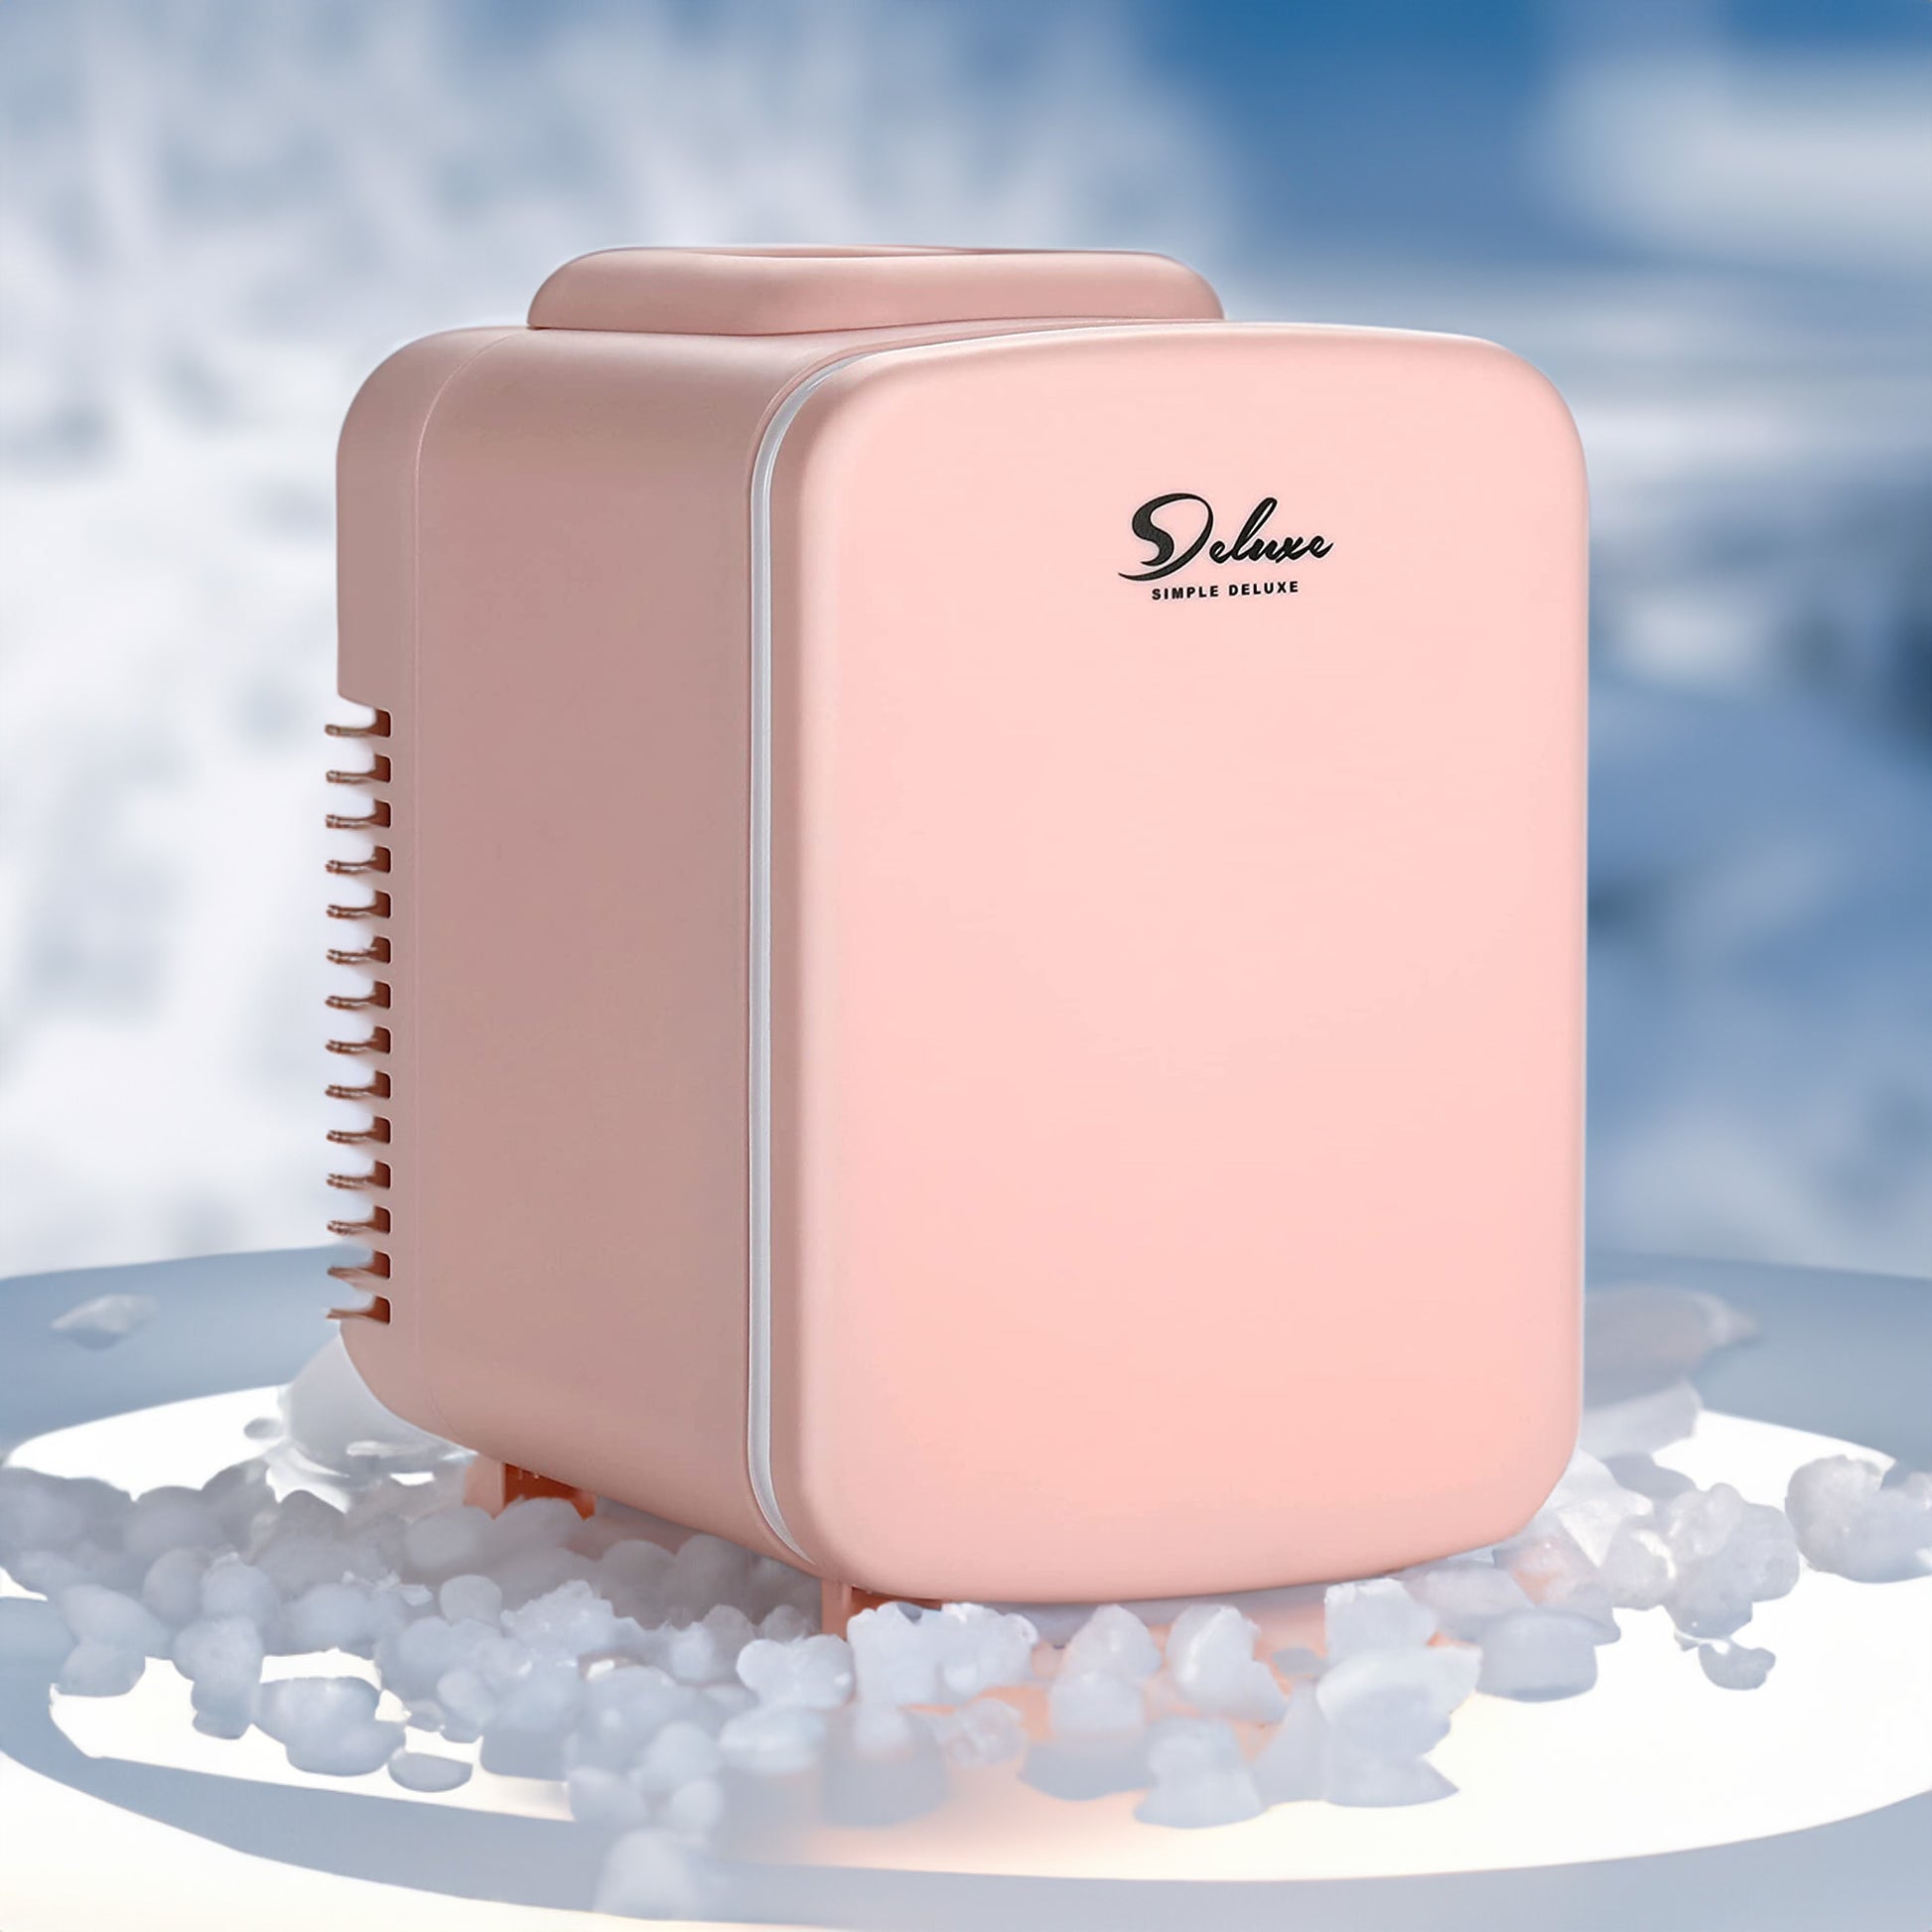 Simple Deluxe Mini Fridge: Compact Portable Cooler & Warmer for Skincare, Beverages, Food, and Cosmetics - lolaluxeshop